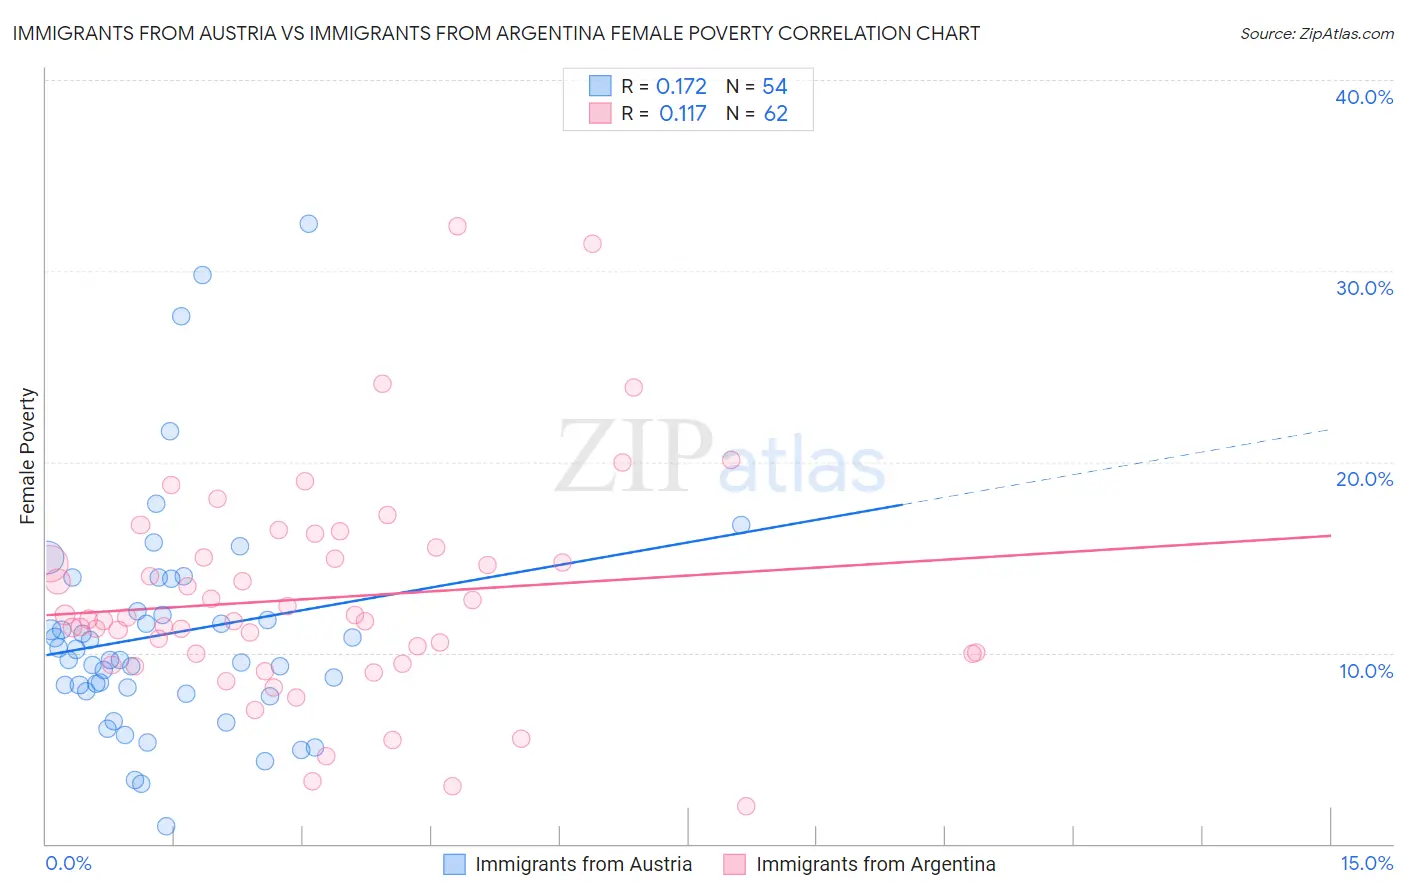 Immigrants from Austria vs Immigrants from Argentina Female Poverty